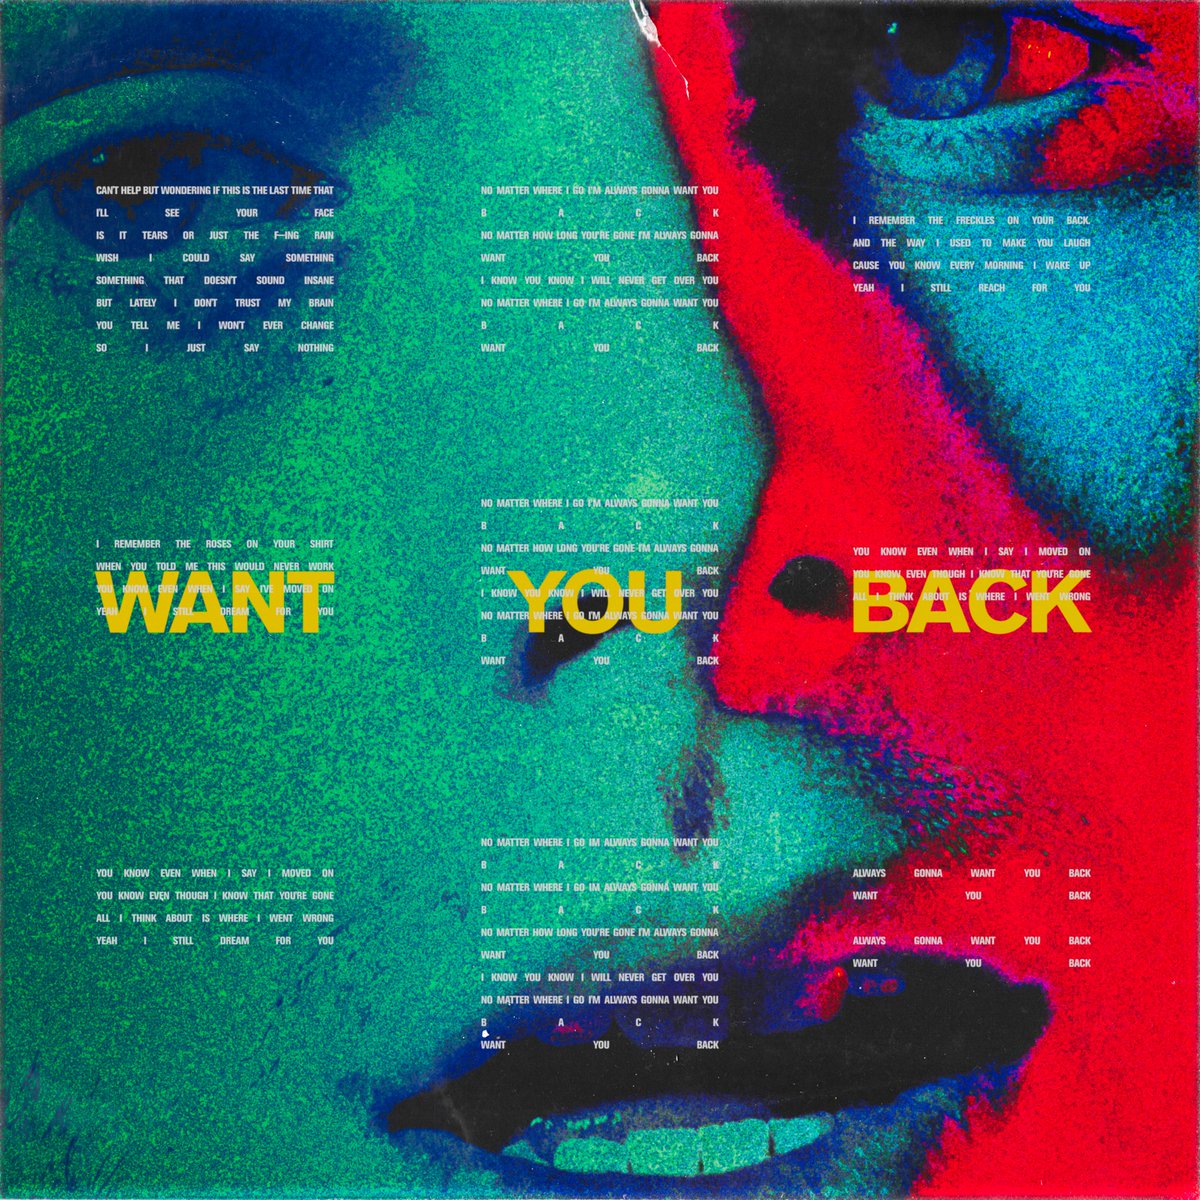 Want You Back is OUT NOW!!!
Tell your friends, your parents, your dog, the strangers on the street,...
BUY it
STREAM it
LET'S GET 5SOS TO #1 !!!

#WantYouBack 
#WantYouBackTODAY